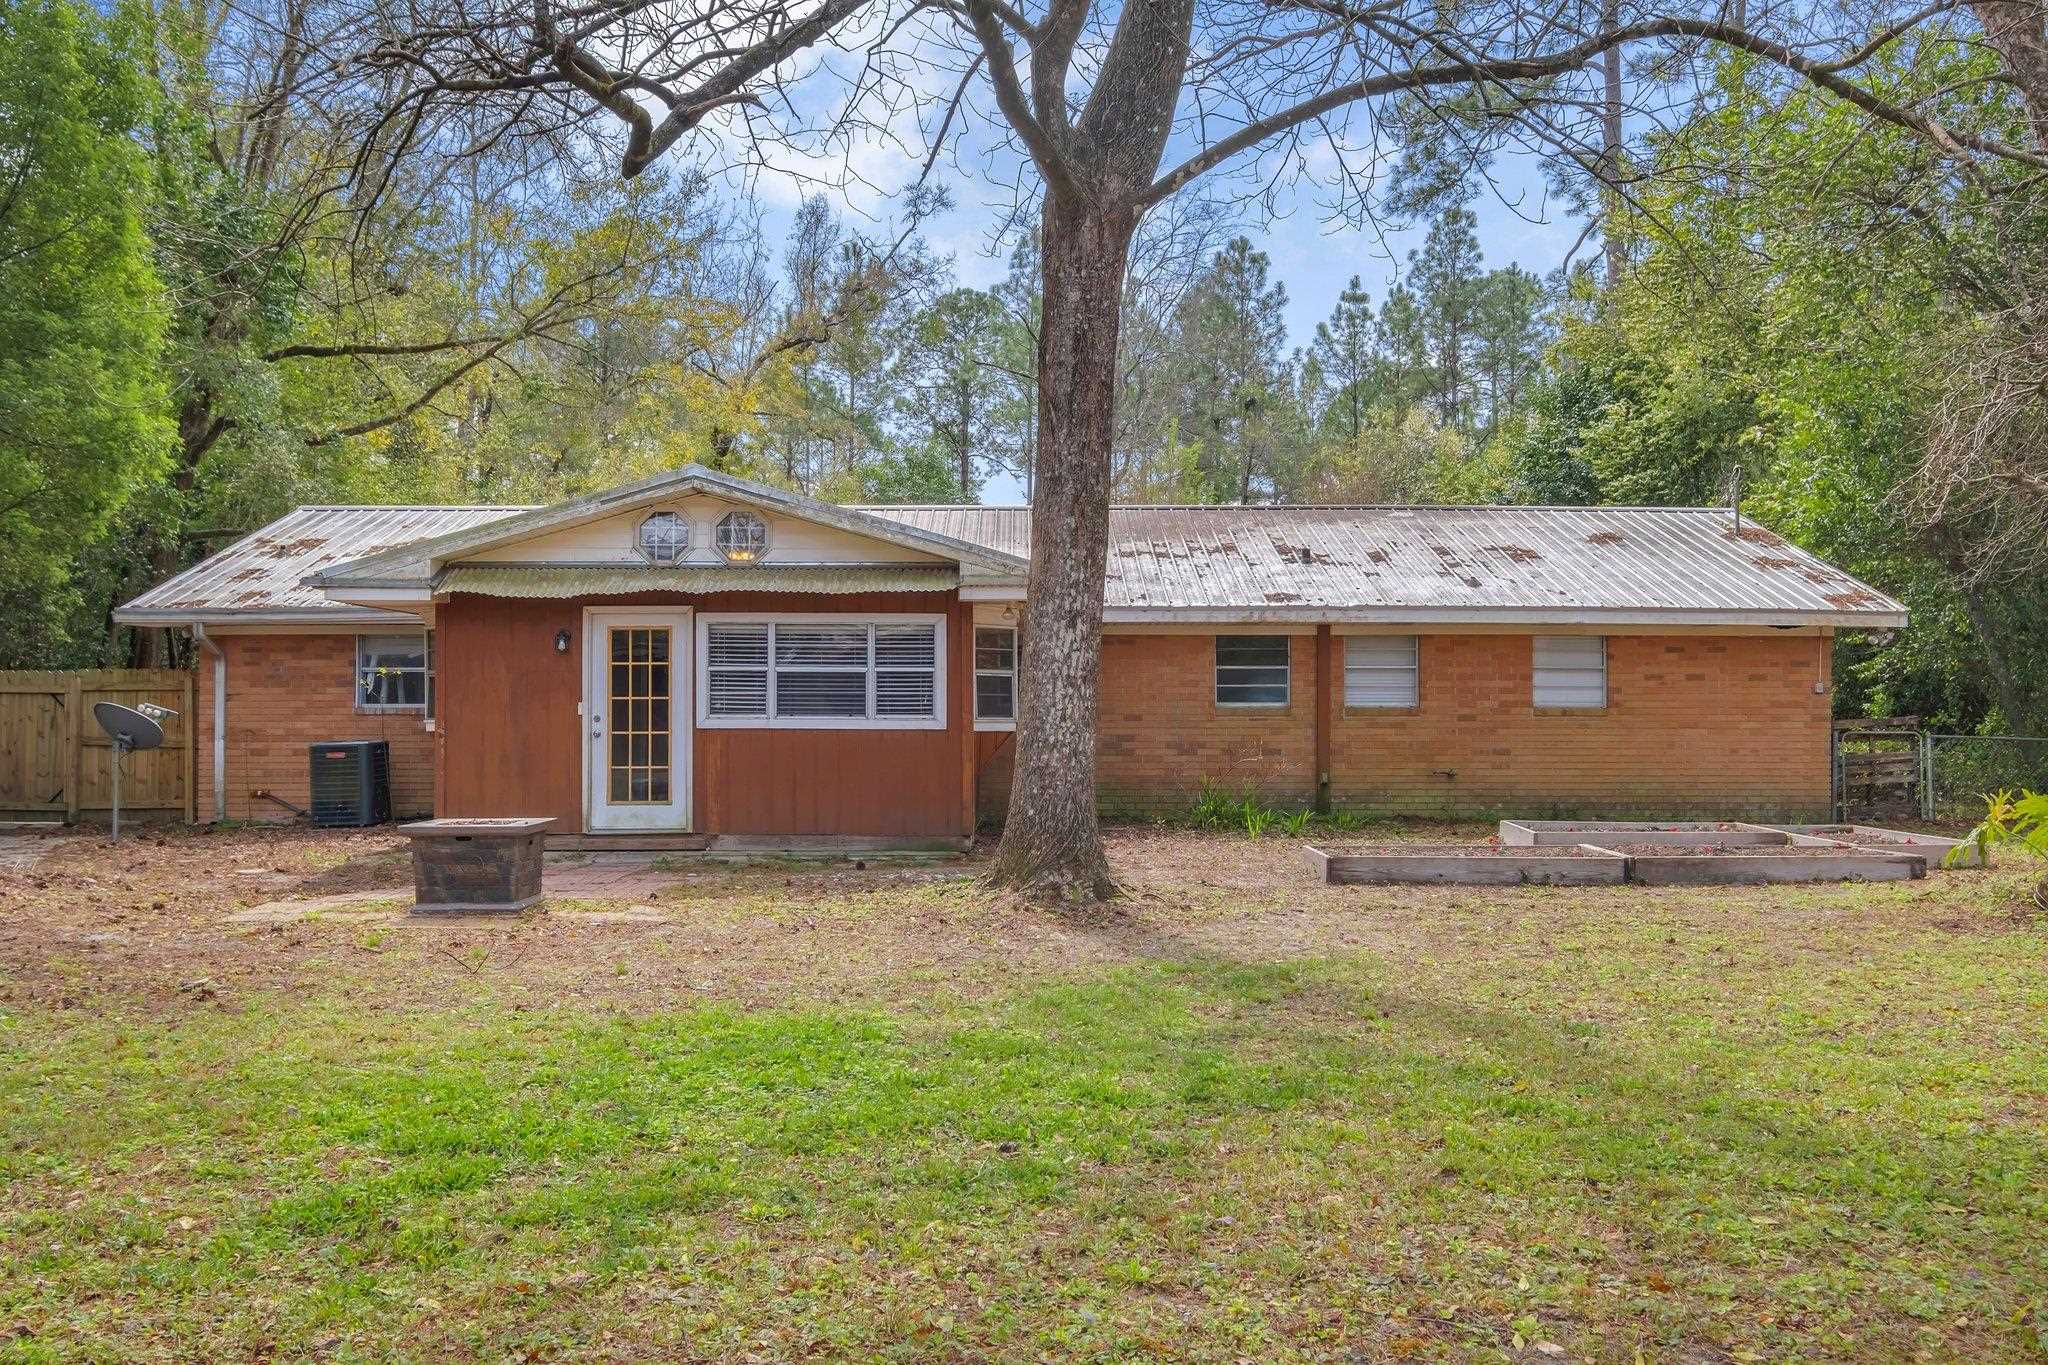 2040 Page Road,TALLAHASSEE,Florida 32305,3 Bedrooms Bedrooms,2 BathroomsBathrooms,Detached single family,2040 Page Road,369264